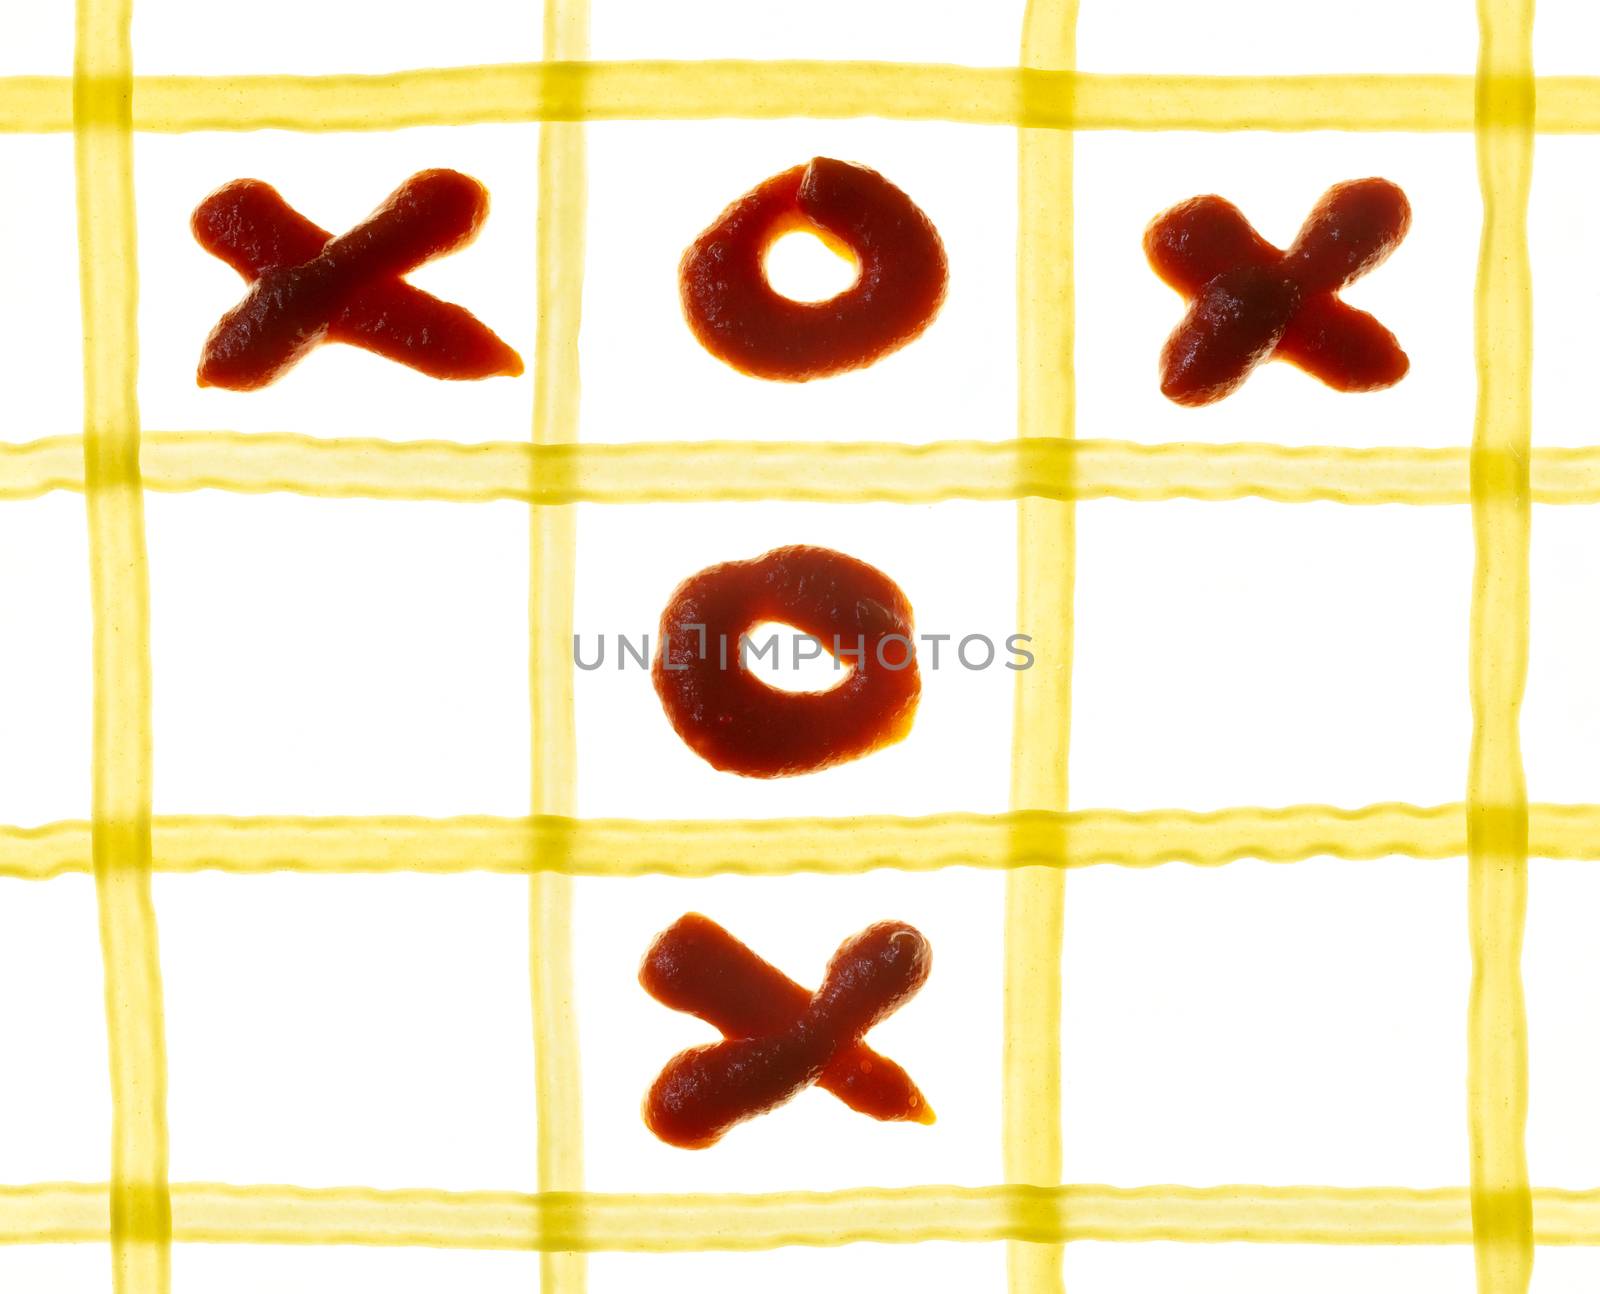 Pasta tic tac toe game on the white background.